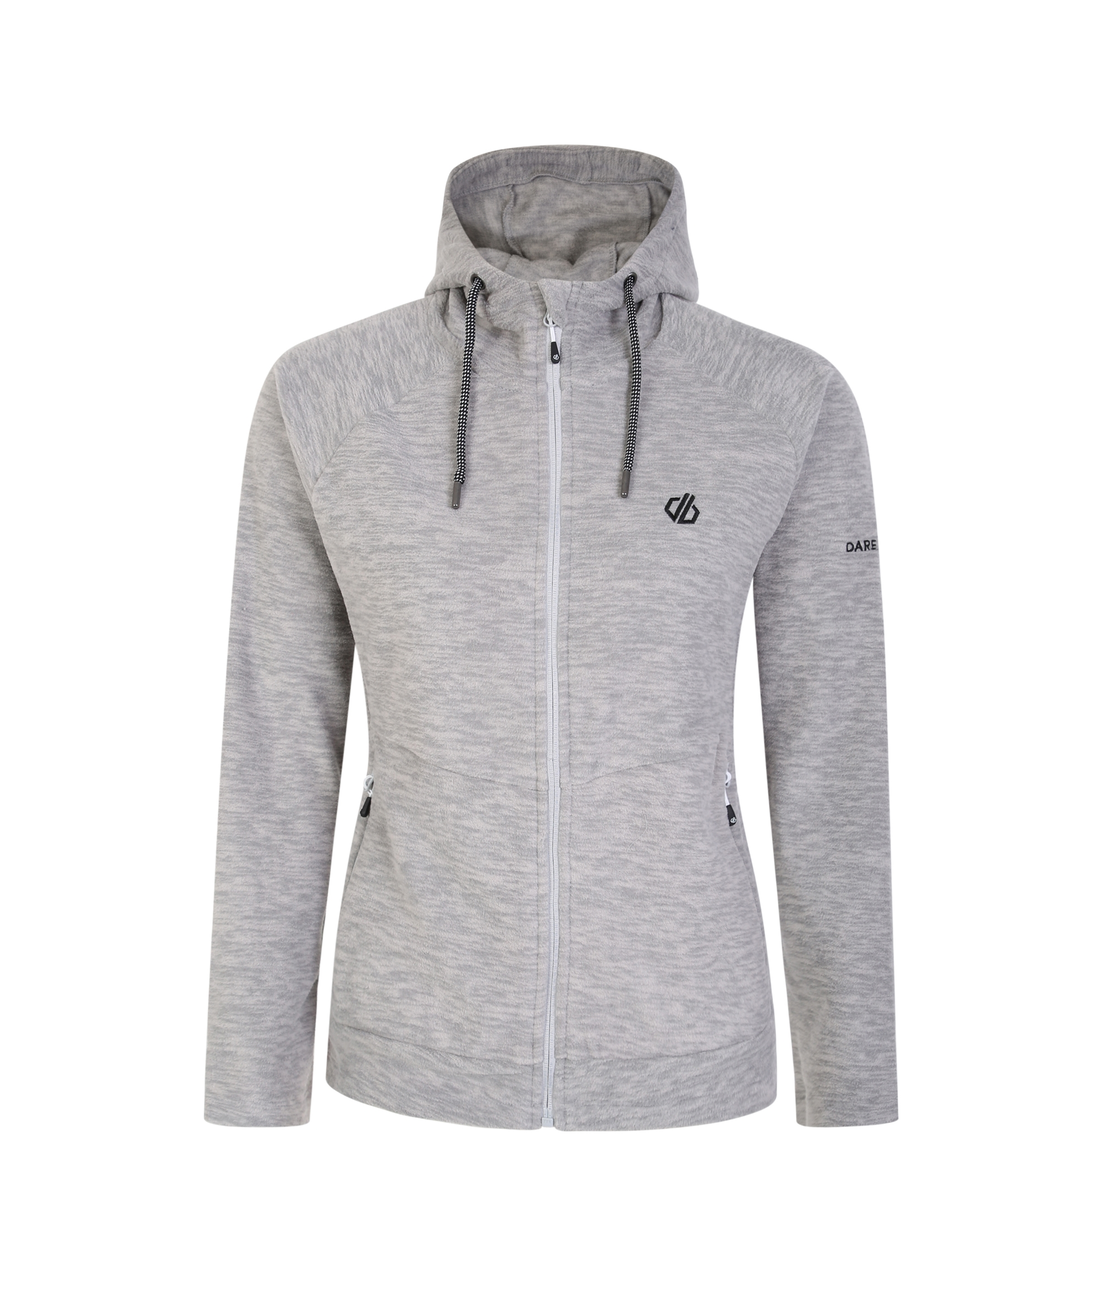 Out & Out Full Zip Fleece